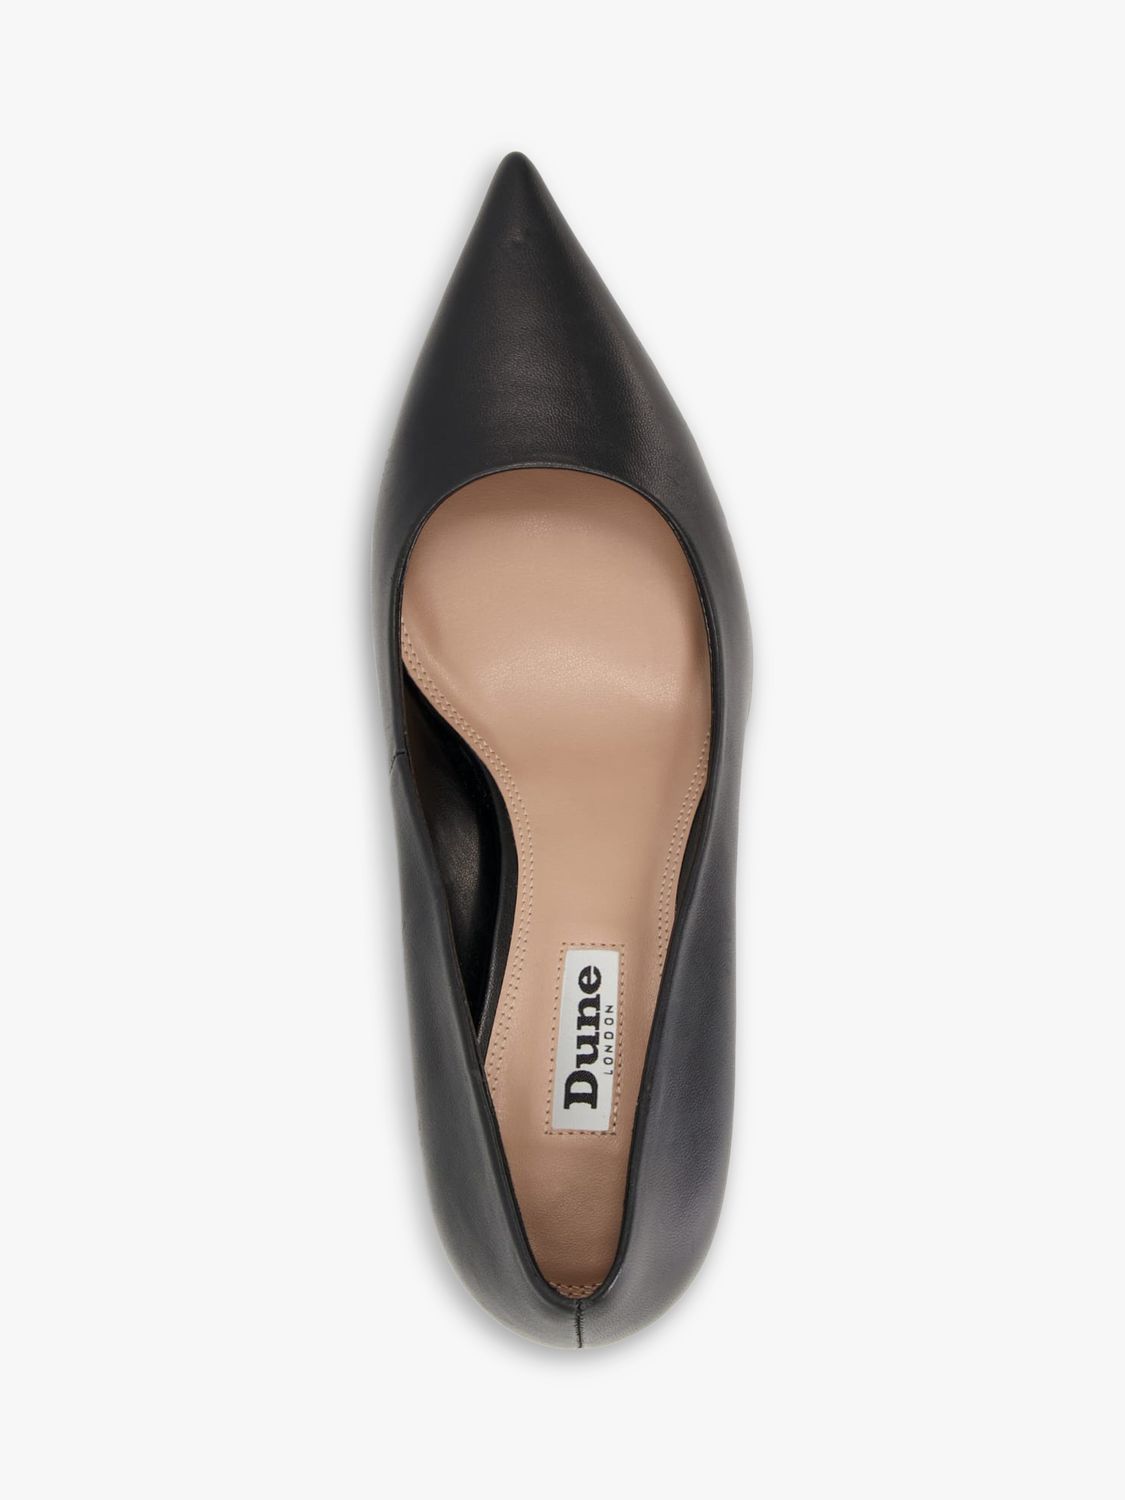 Buy Dune Wide Fit Angelina Leather Court Shoes Online at johnlewis.com